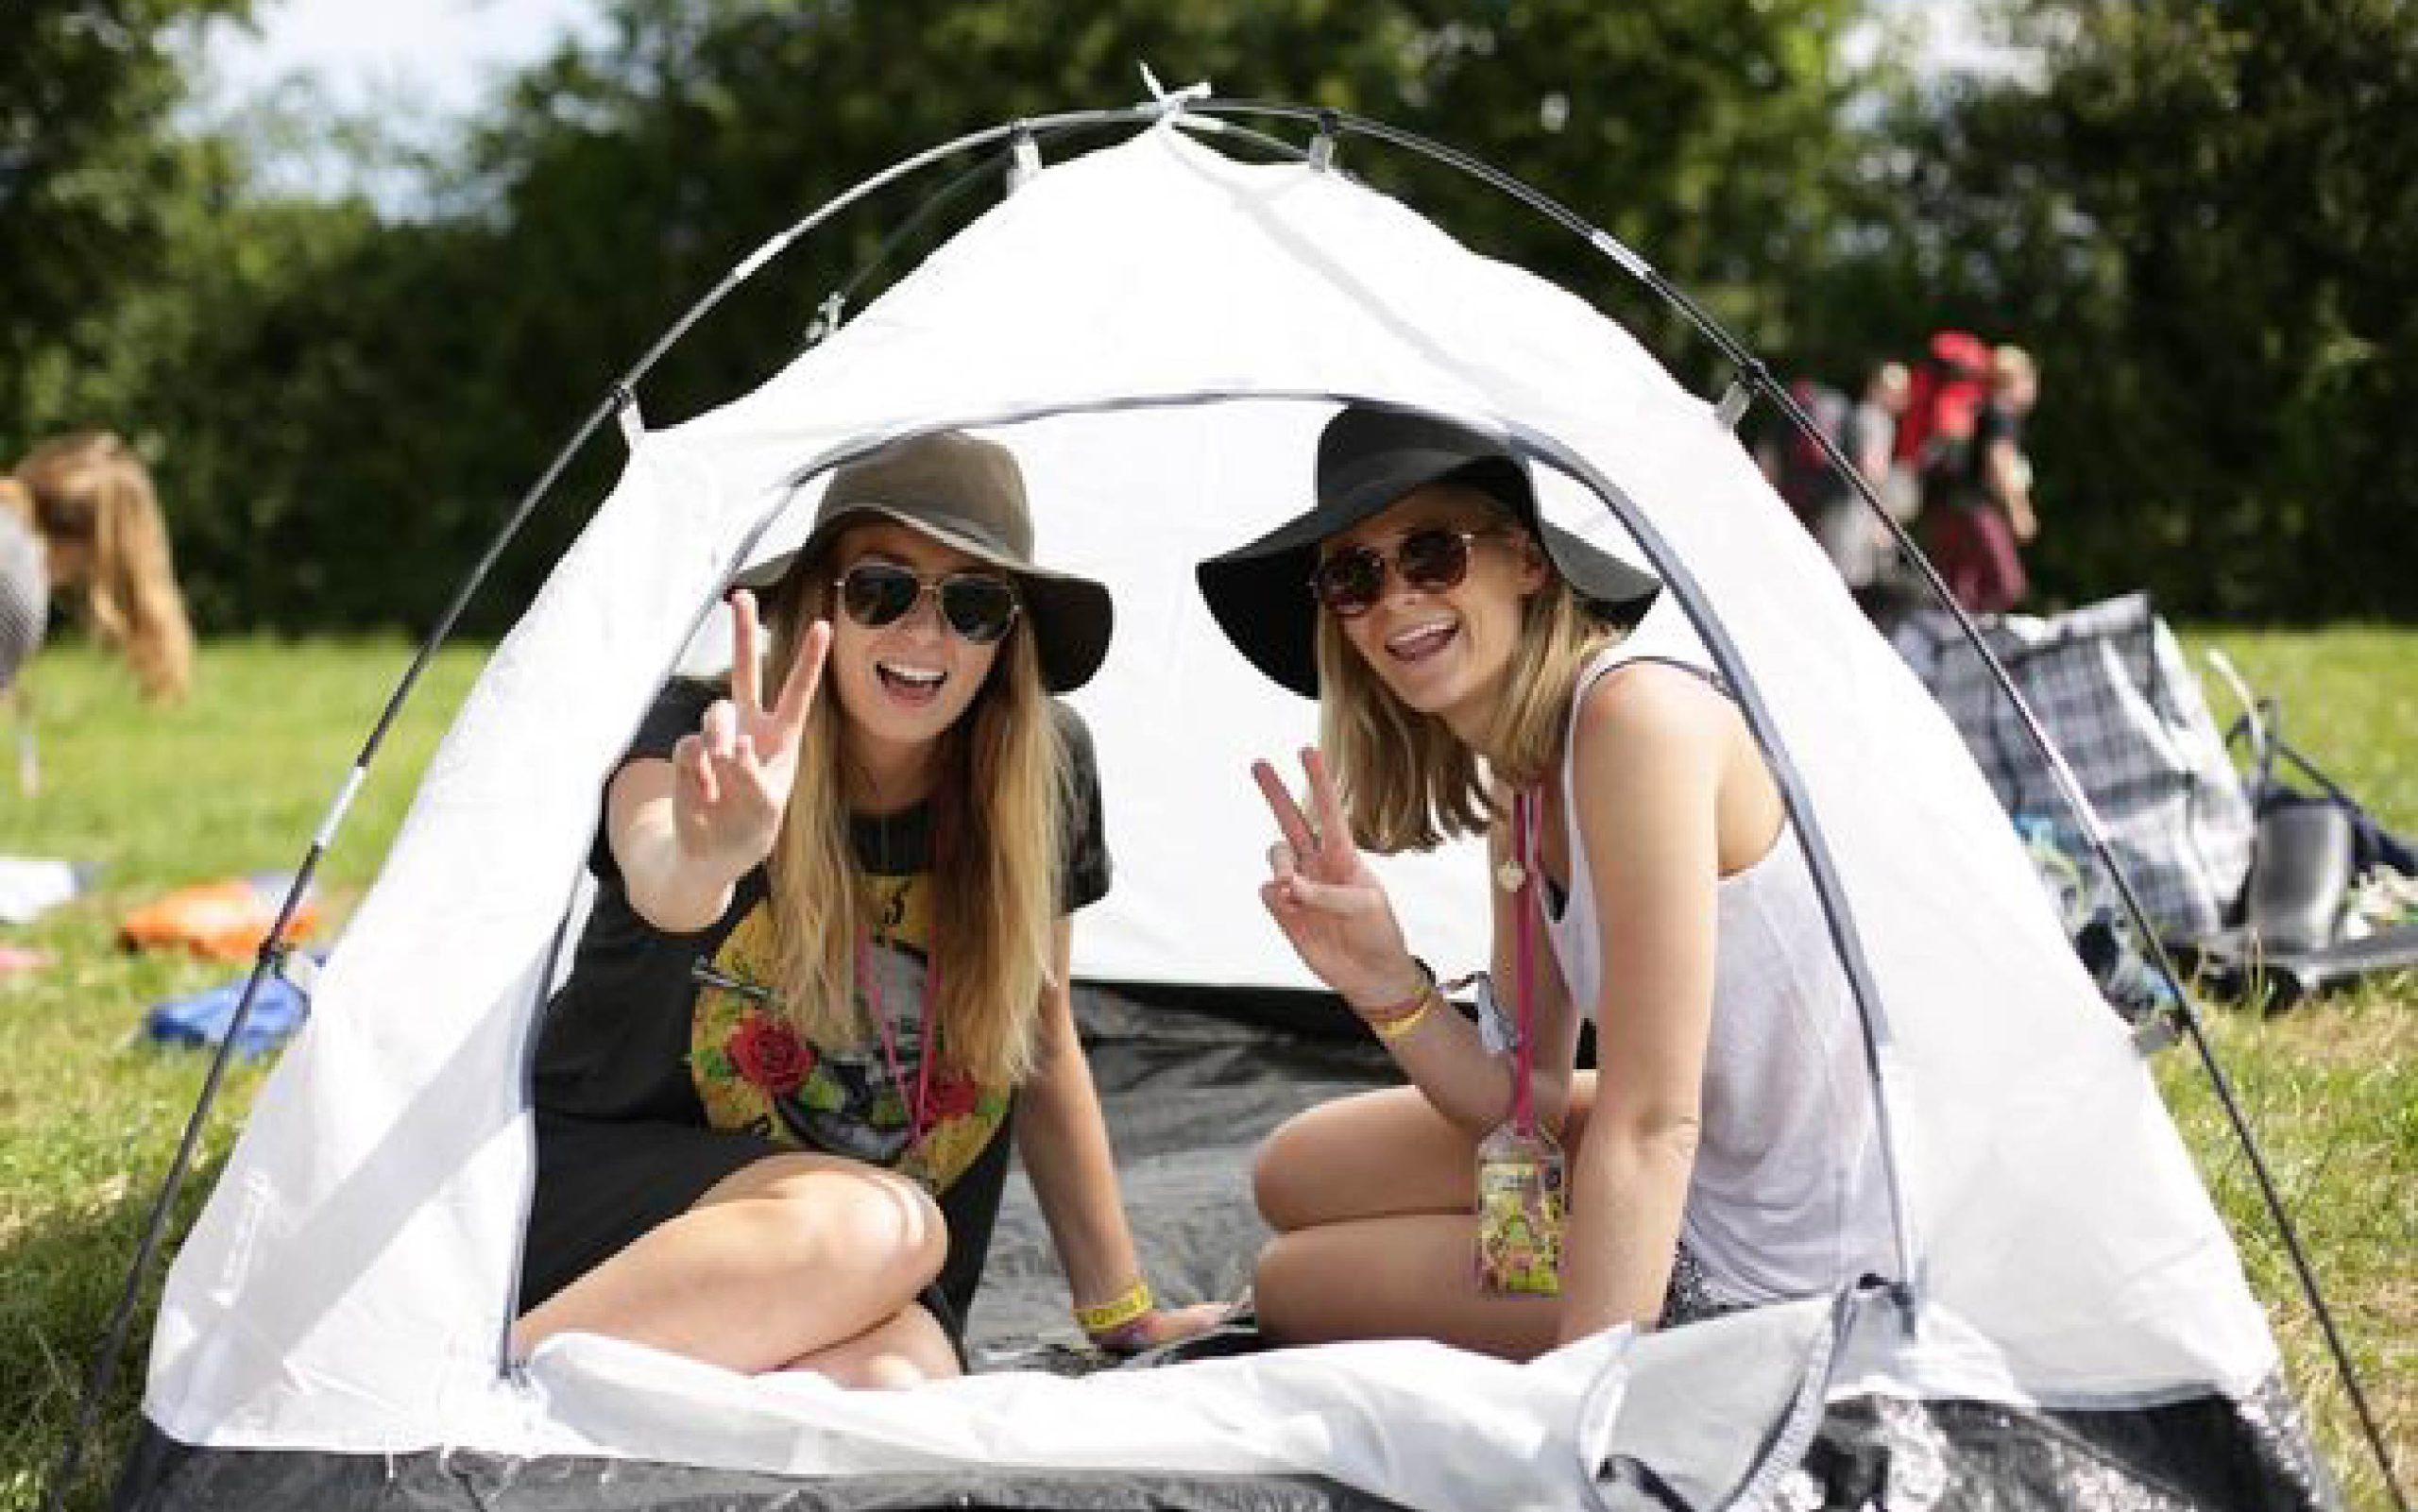 What to take to a festival camping